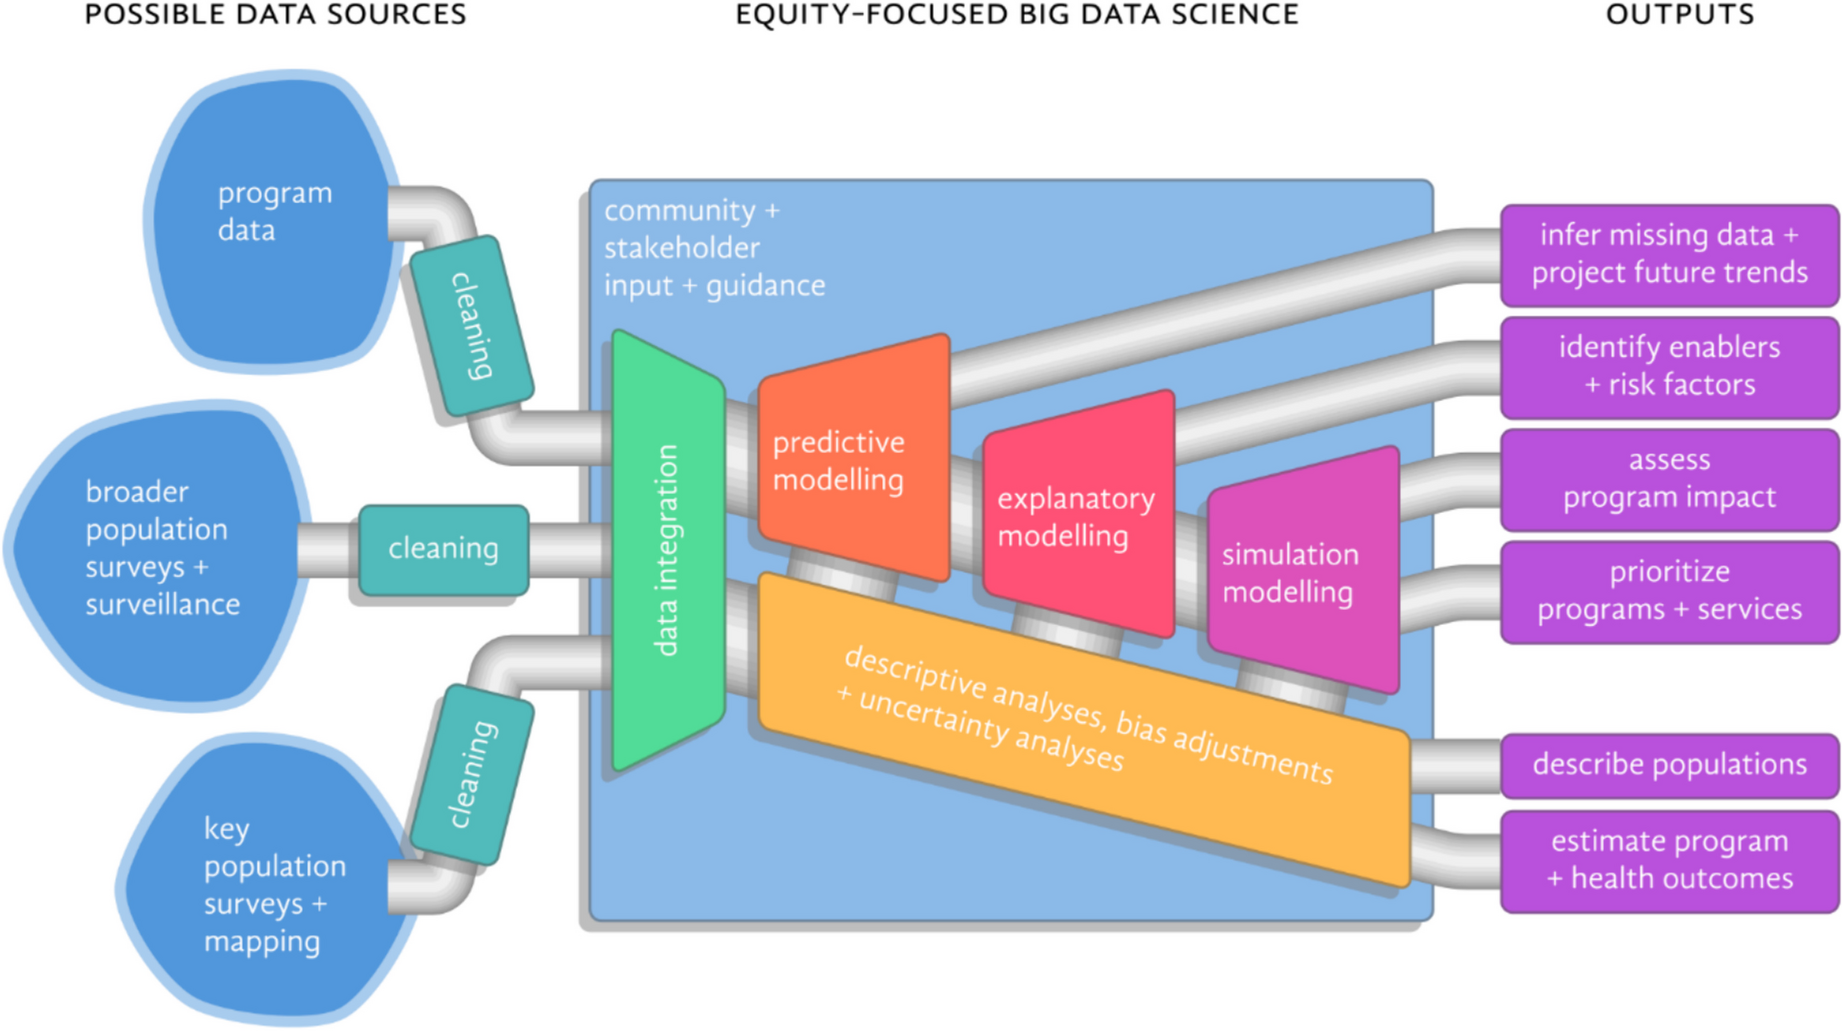 Challenges and Opportunities in Big Data Science to Address Health Inequities and Focus the HIV Response